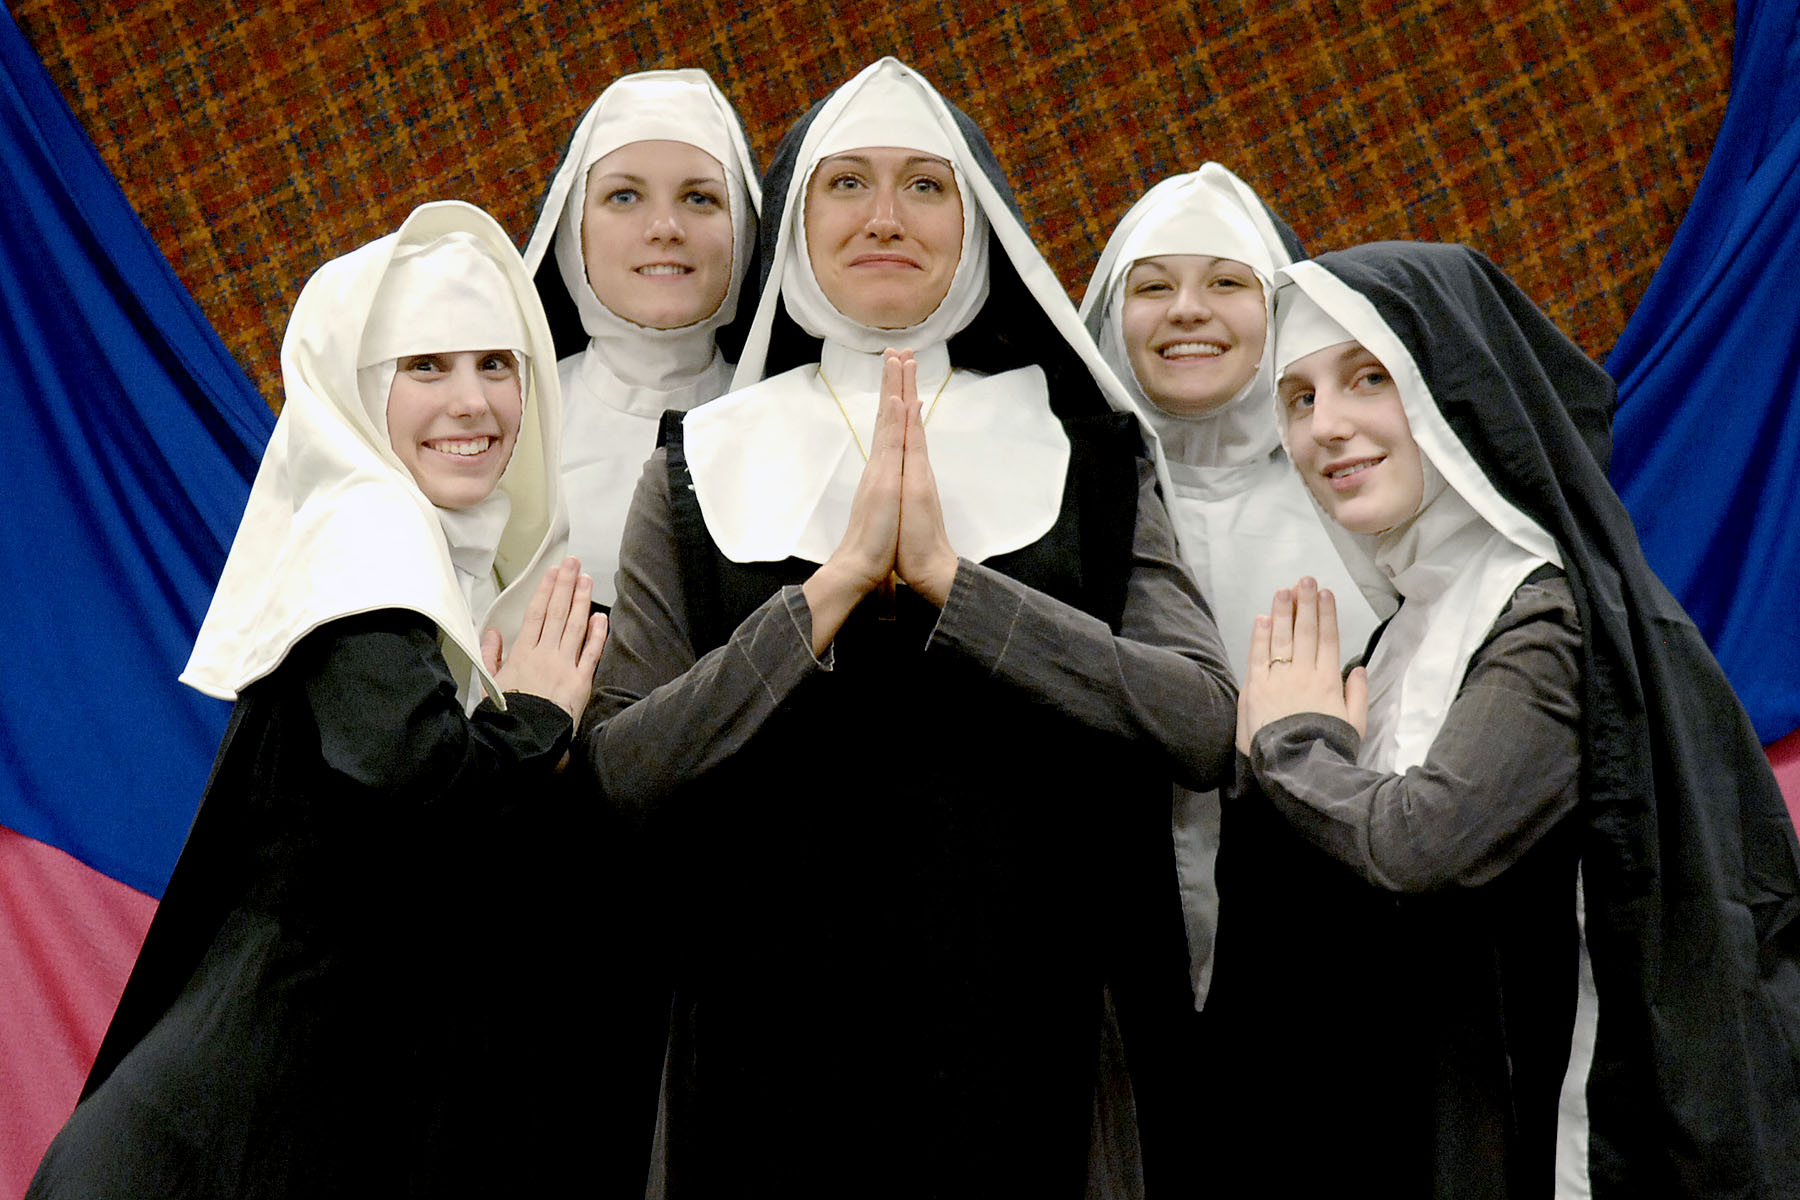 nun girls in white and black with folded hands, posing for the camera